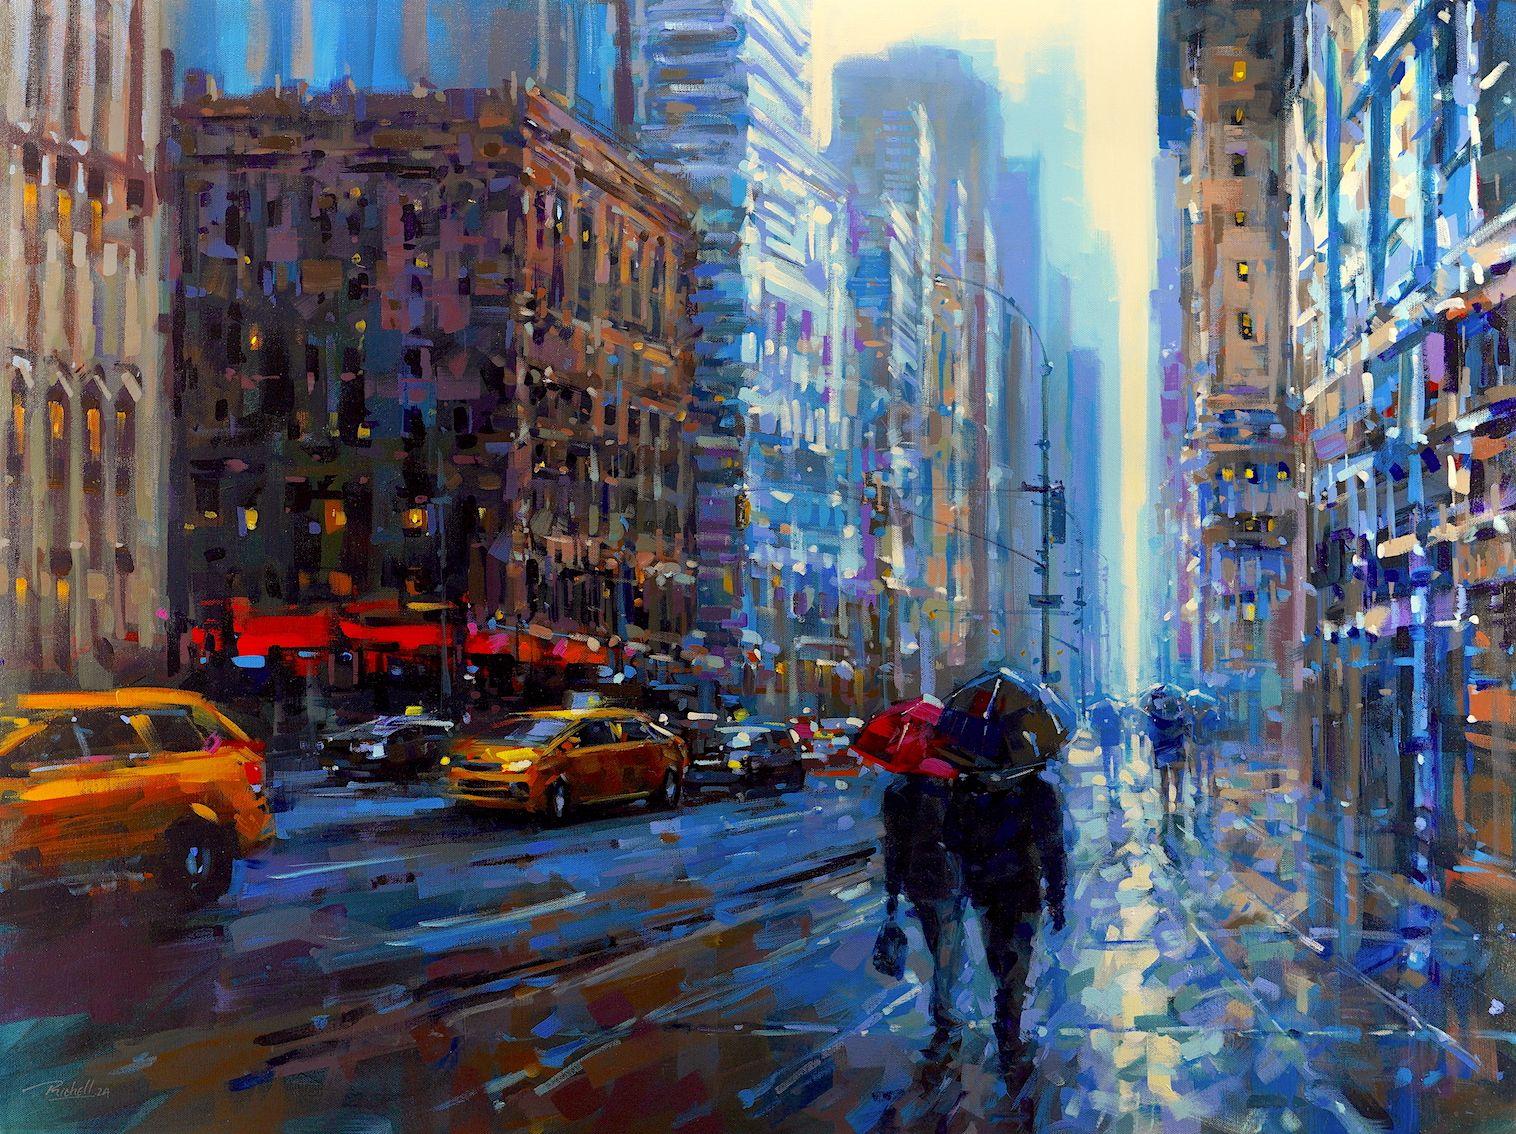 "City Synergy" is a 30x40 oil painting on canvas by artist Richell Castellon. Featured is a rainy day in New York City cityscape. Pedestrians stroll the streets under umbrellas while iconic yellow city taxis race down the street to their